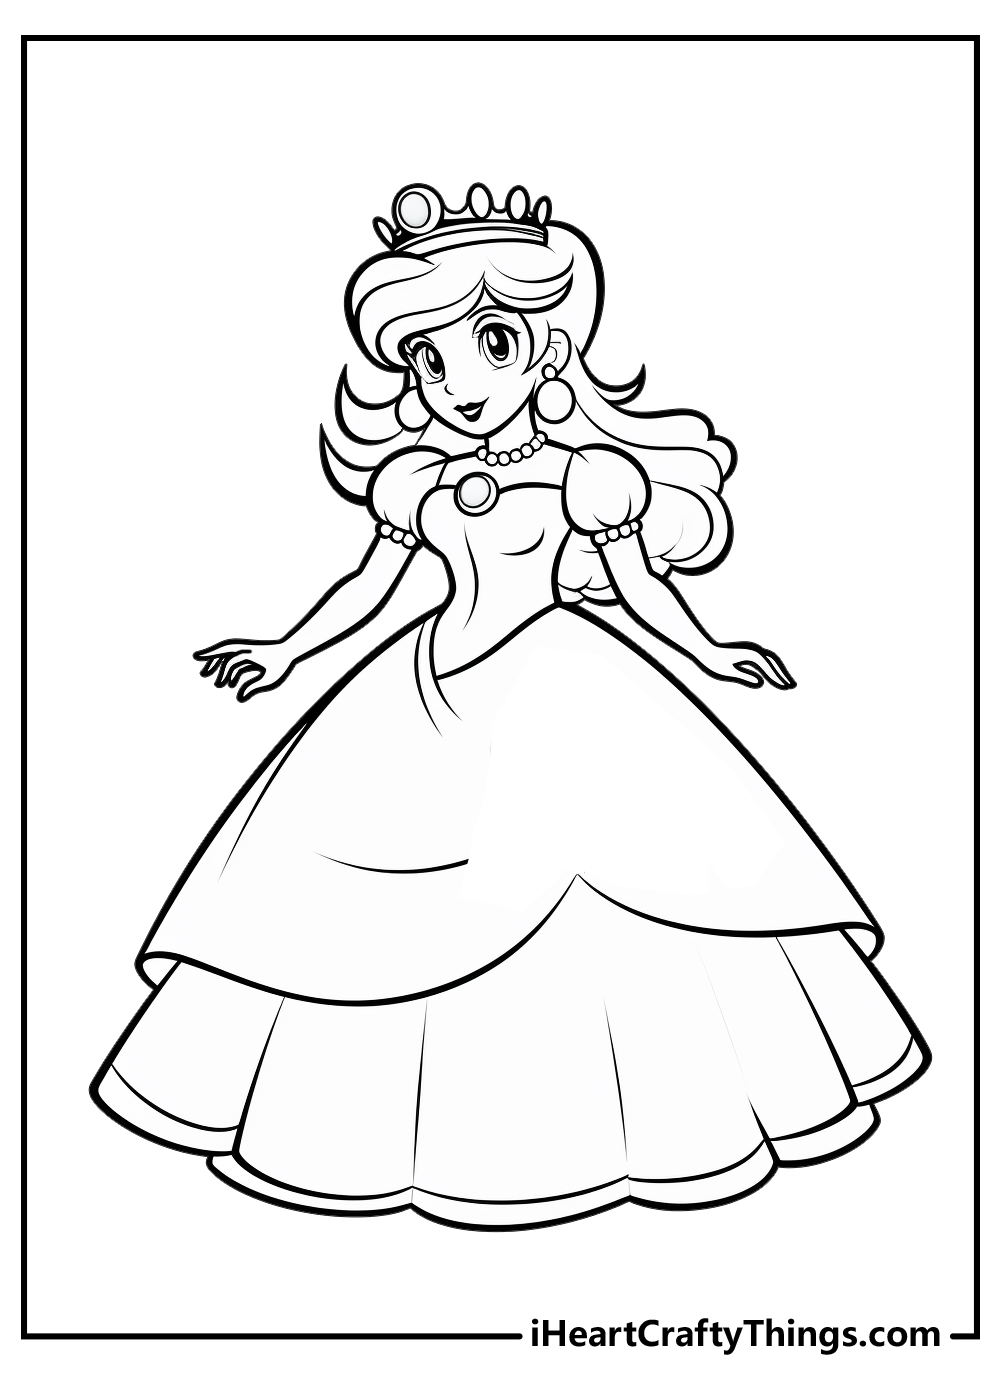 21+ Coloring Pages Princess Peach